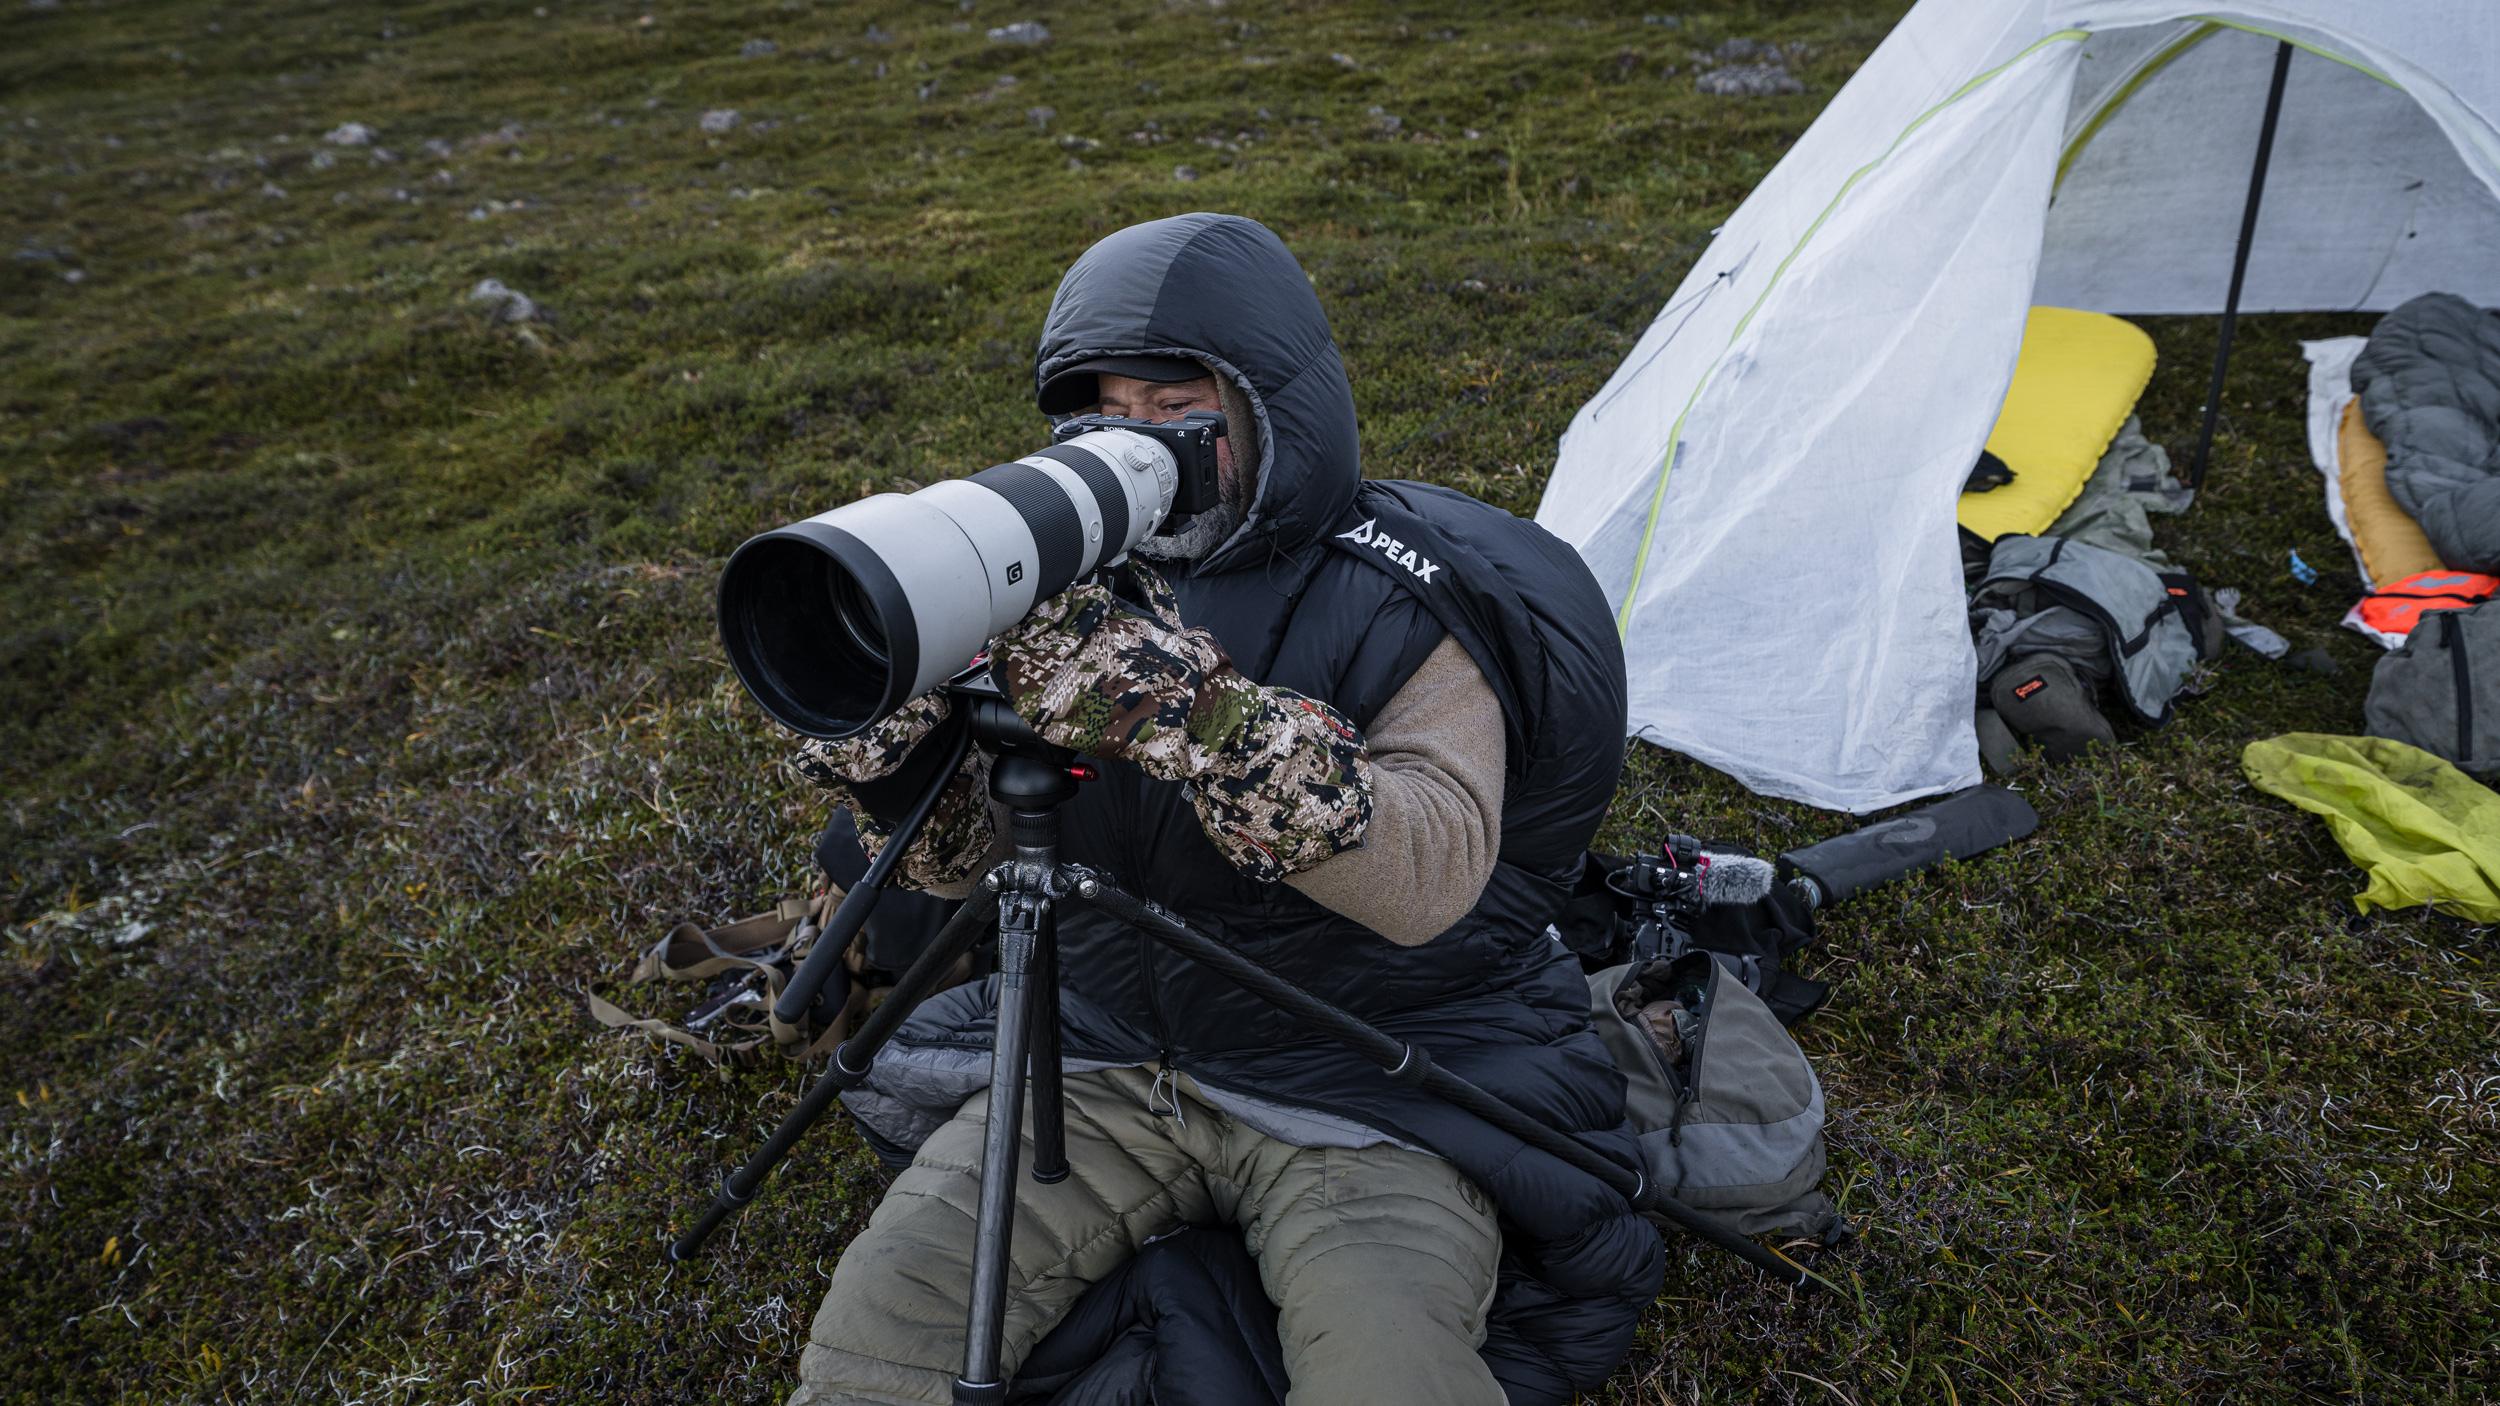 Brian Call taking photos while staying warm inside the PEAX Solace 15 sleeping bag